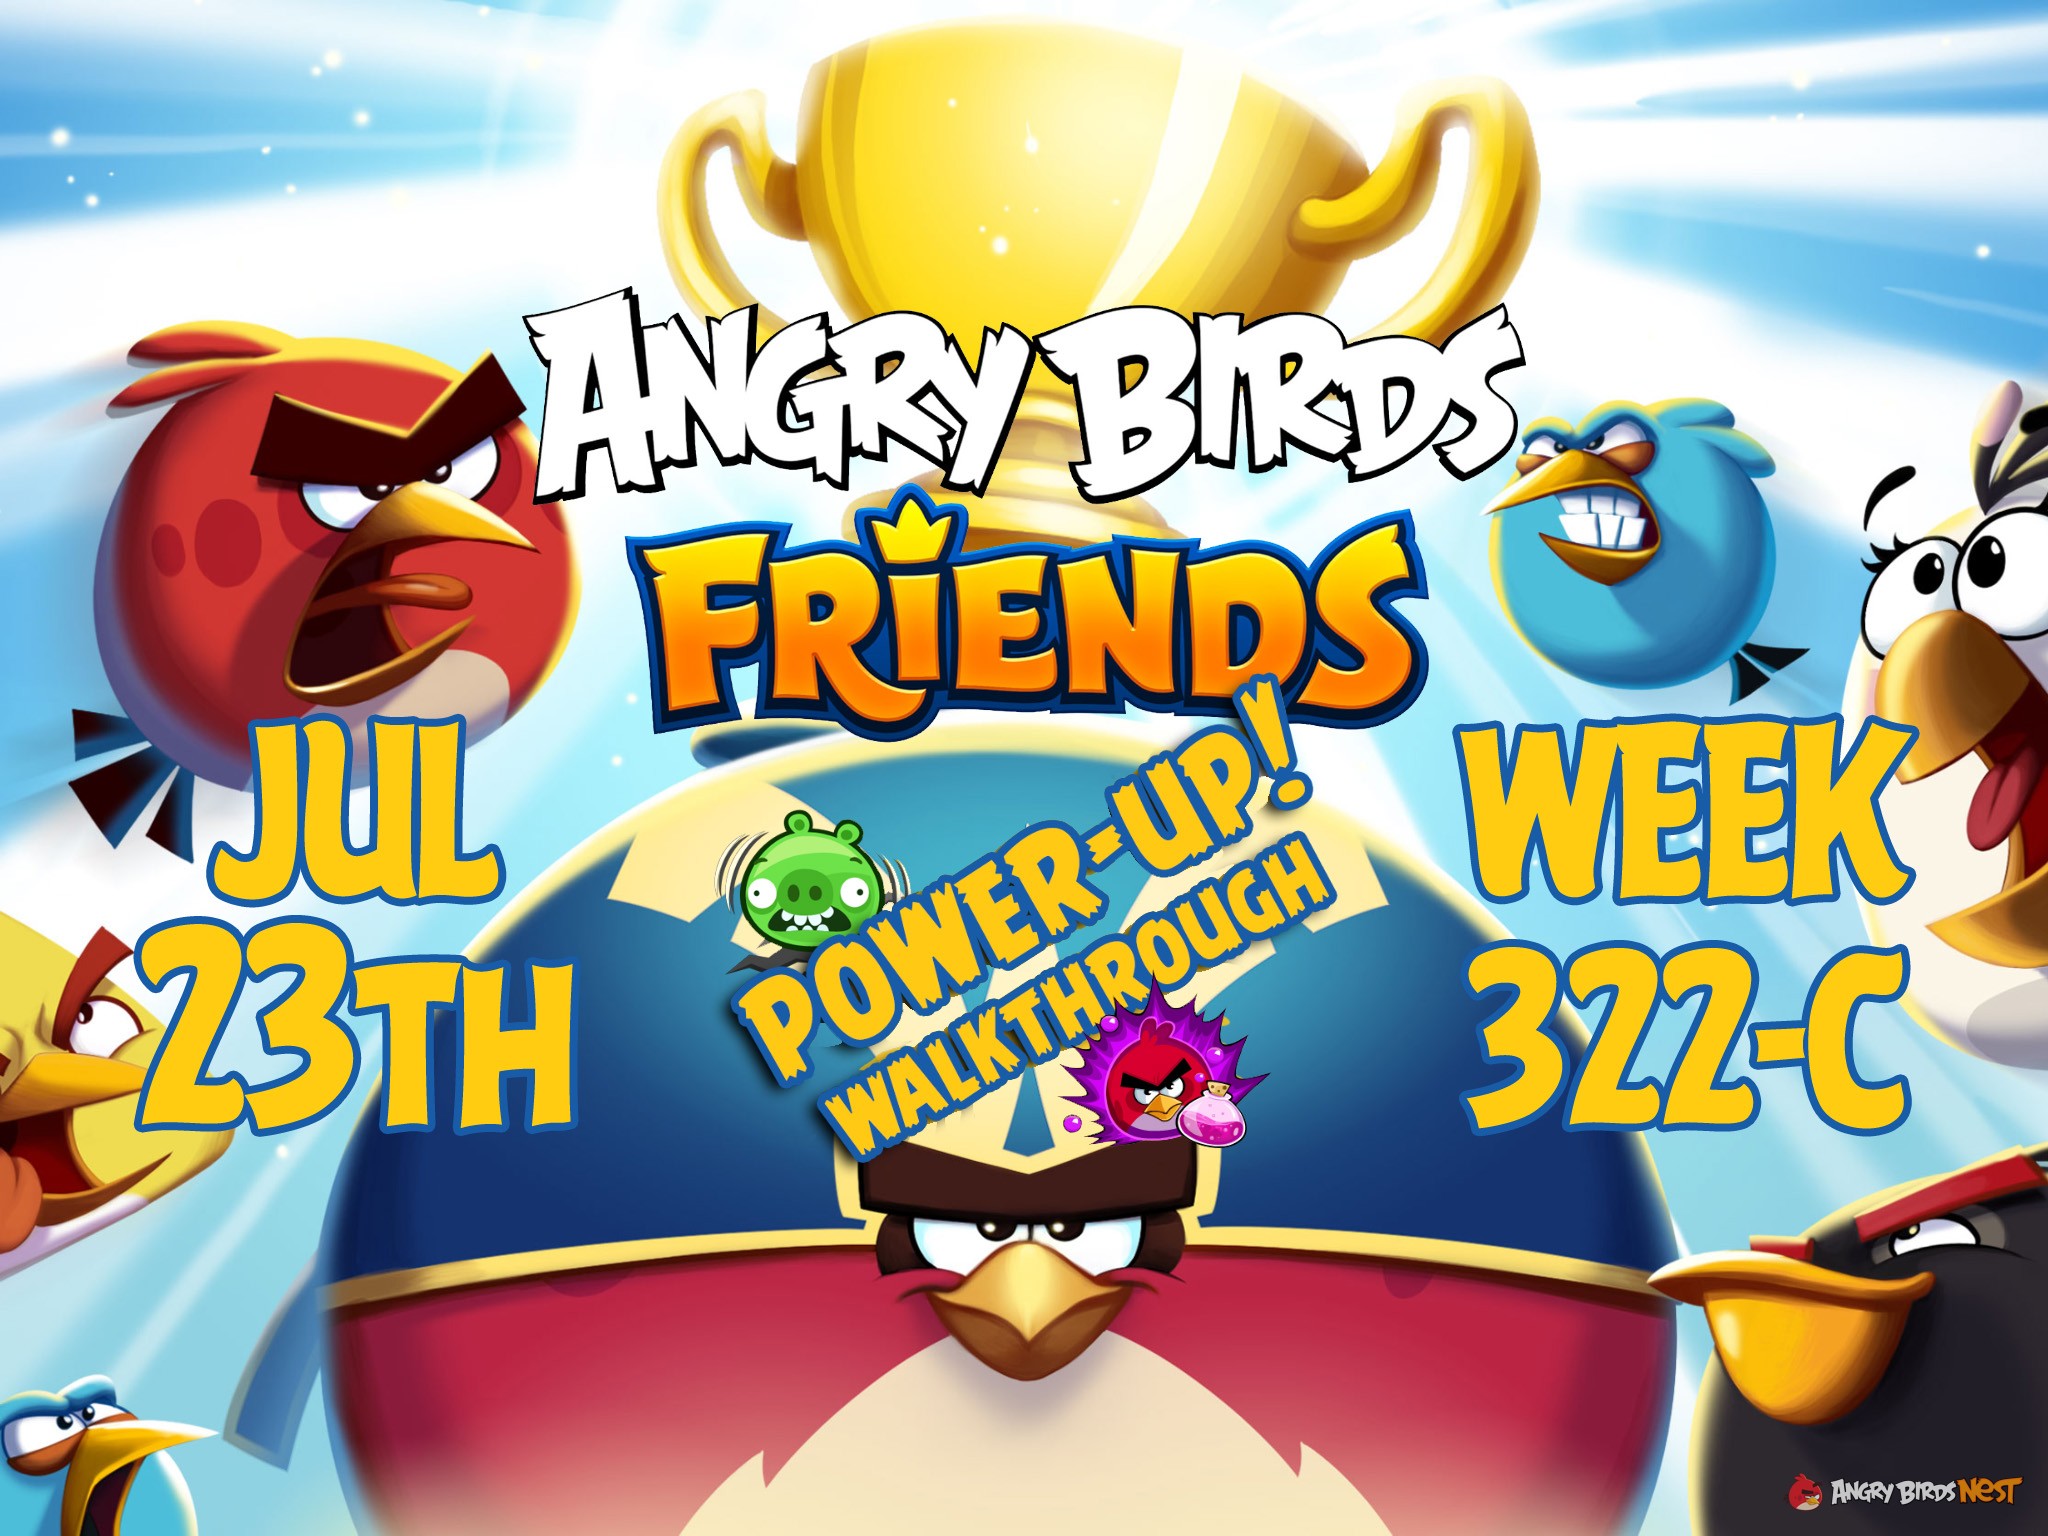 Angry-Birds-Friends-Tournament-Week-322-C-Feature-Image-PU